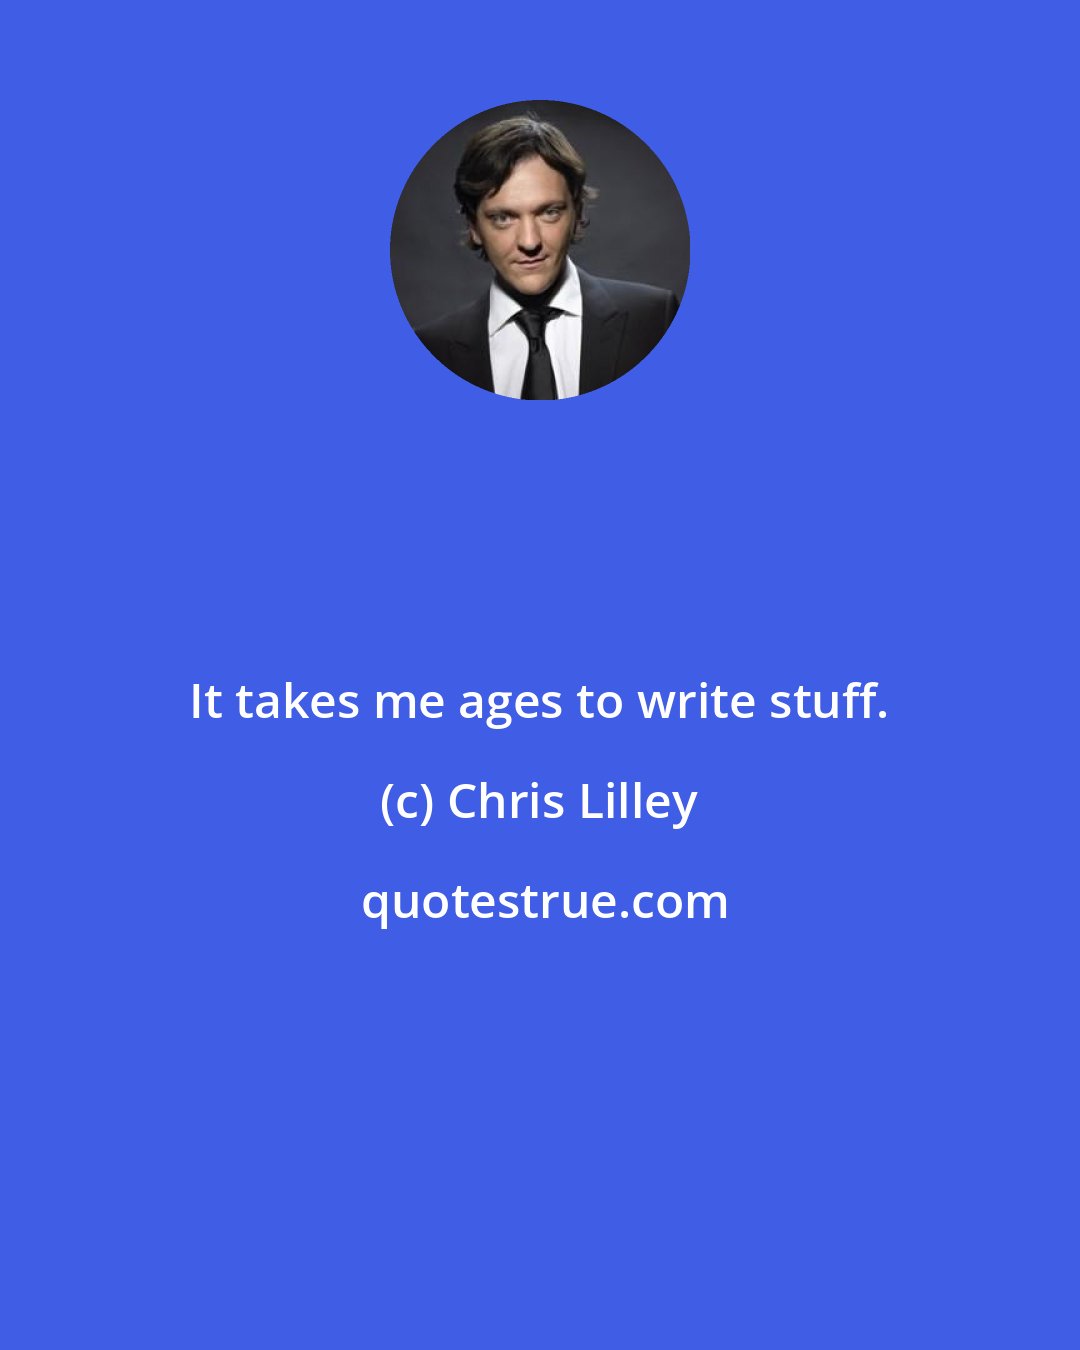 Chris Lilley: It takes me ages to write stuff.